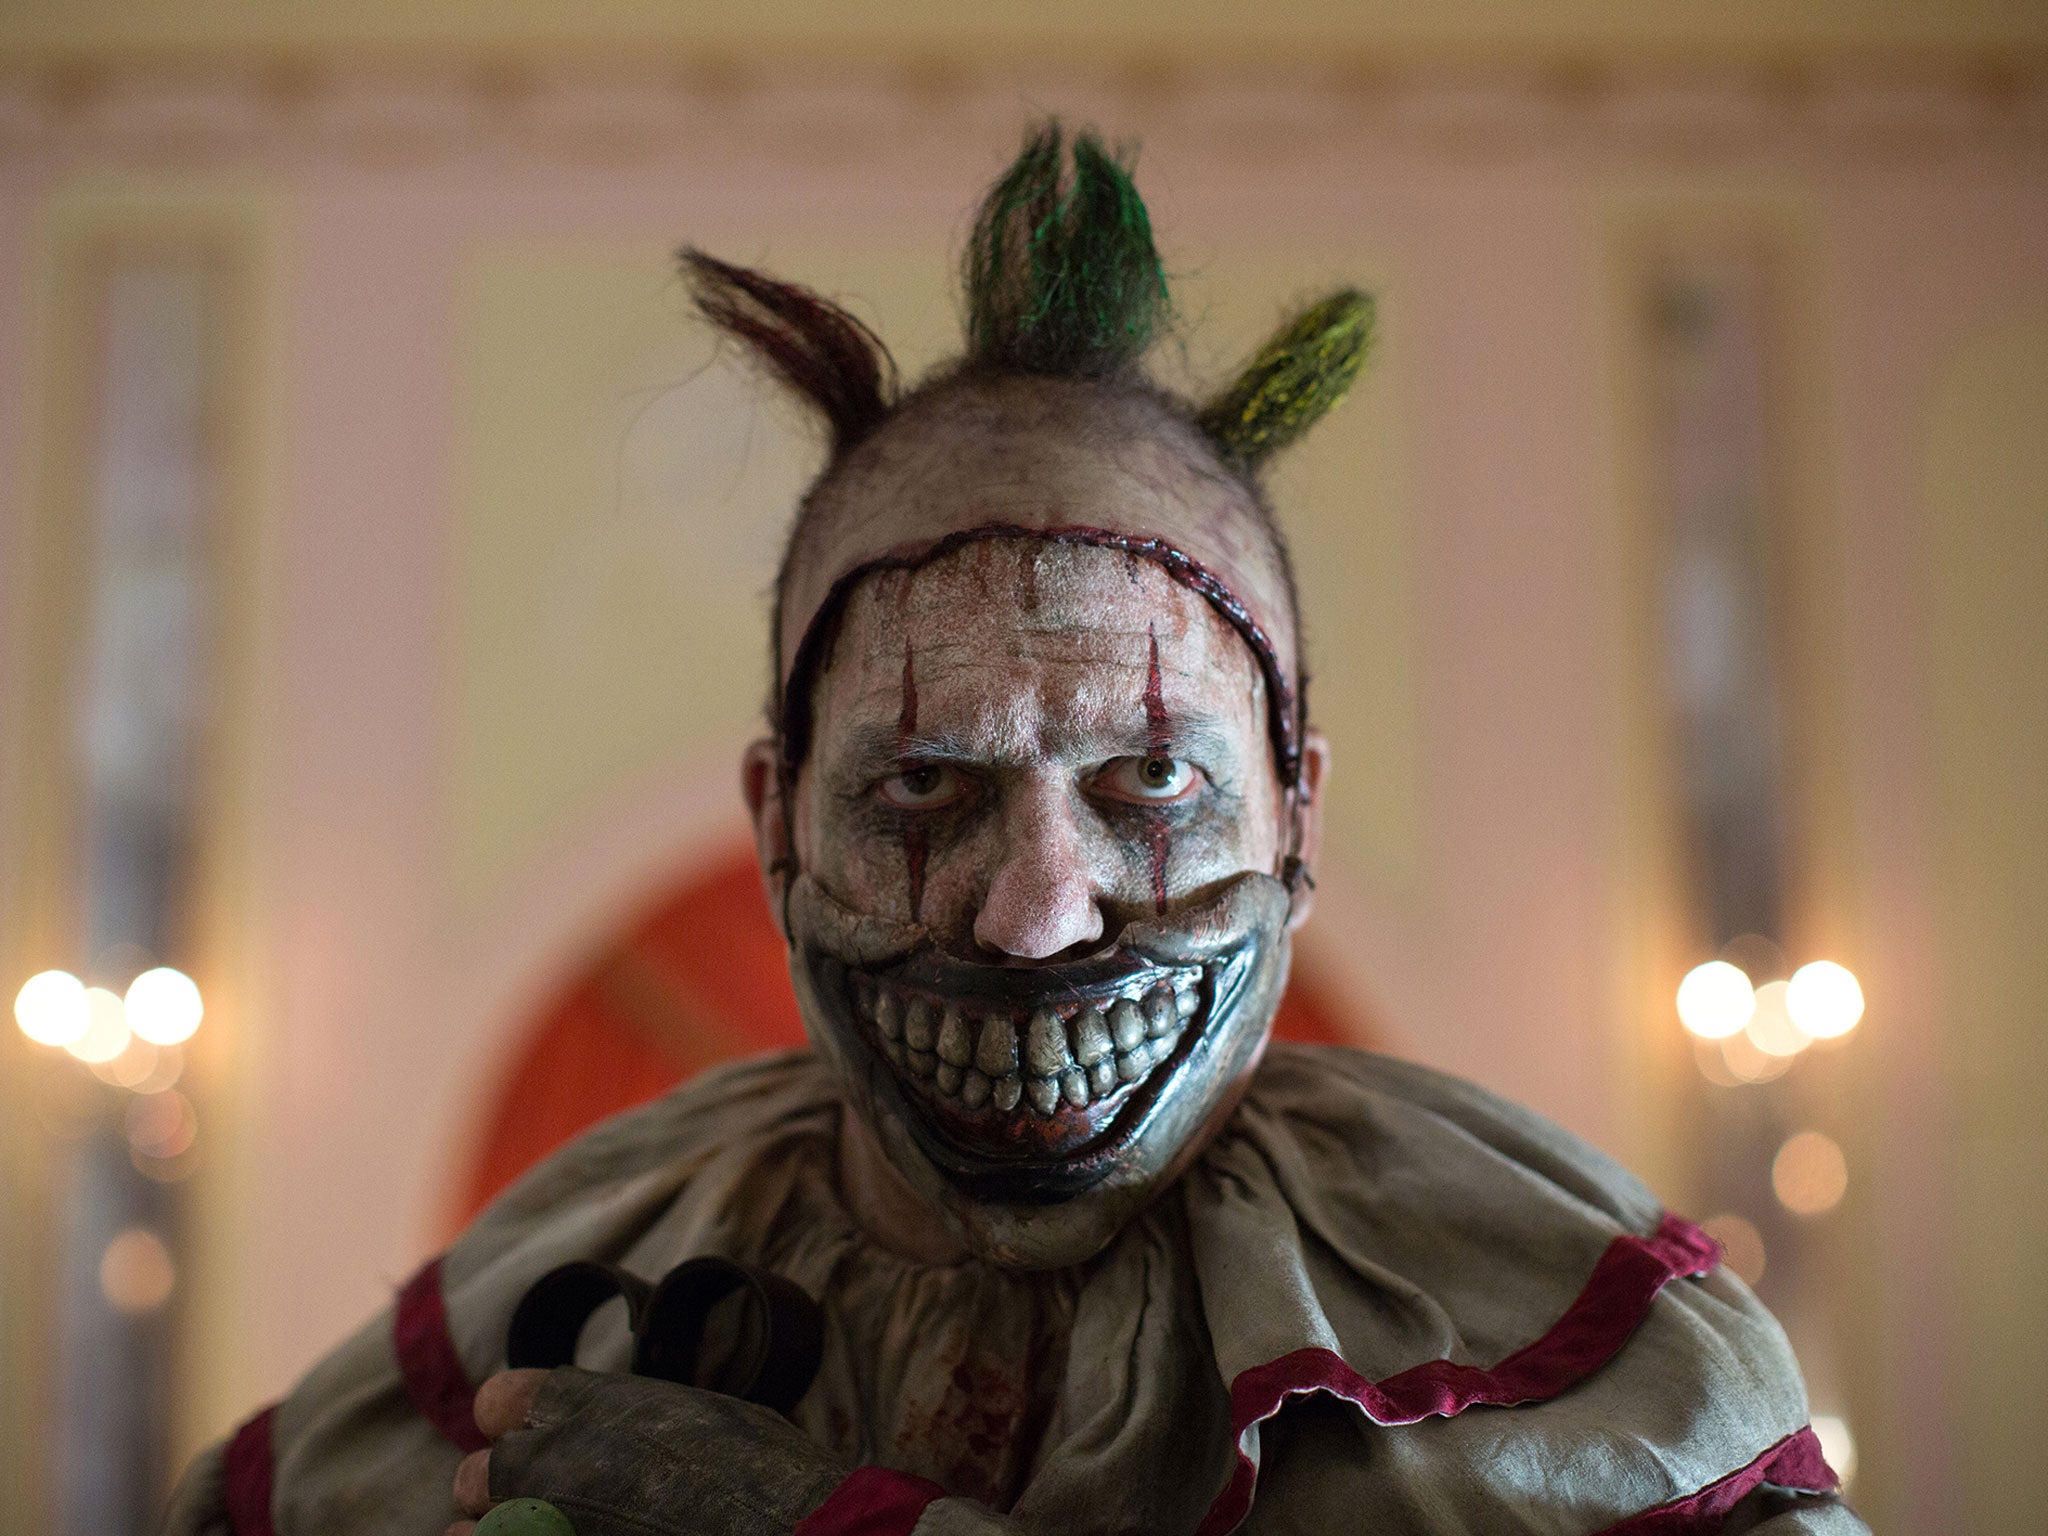 Twisty the clown will not make you laugh